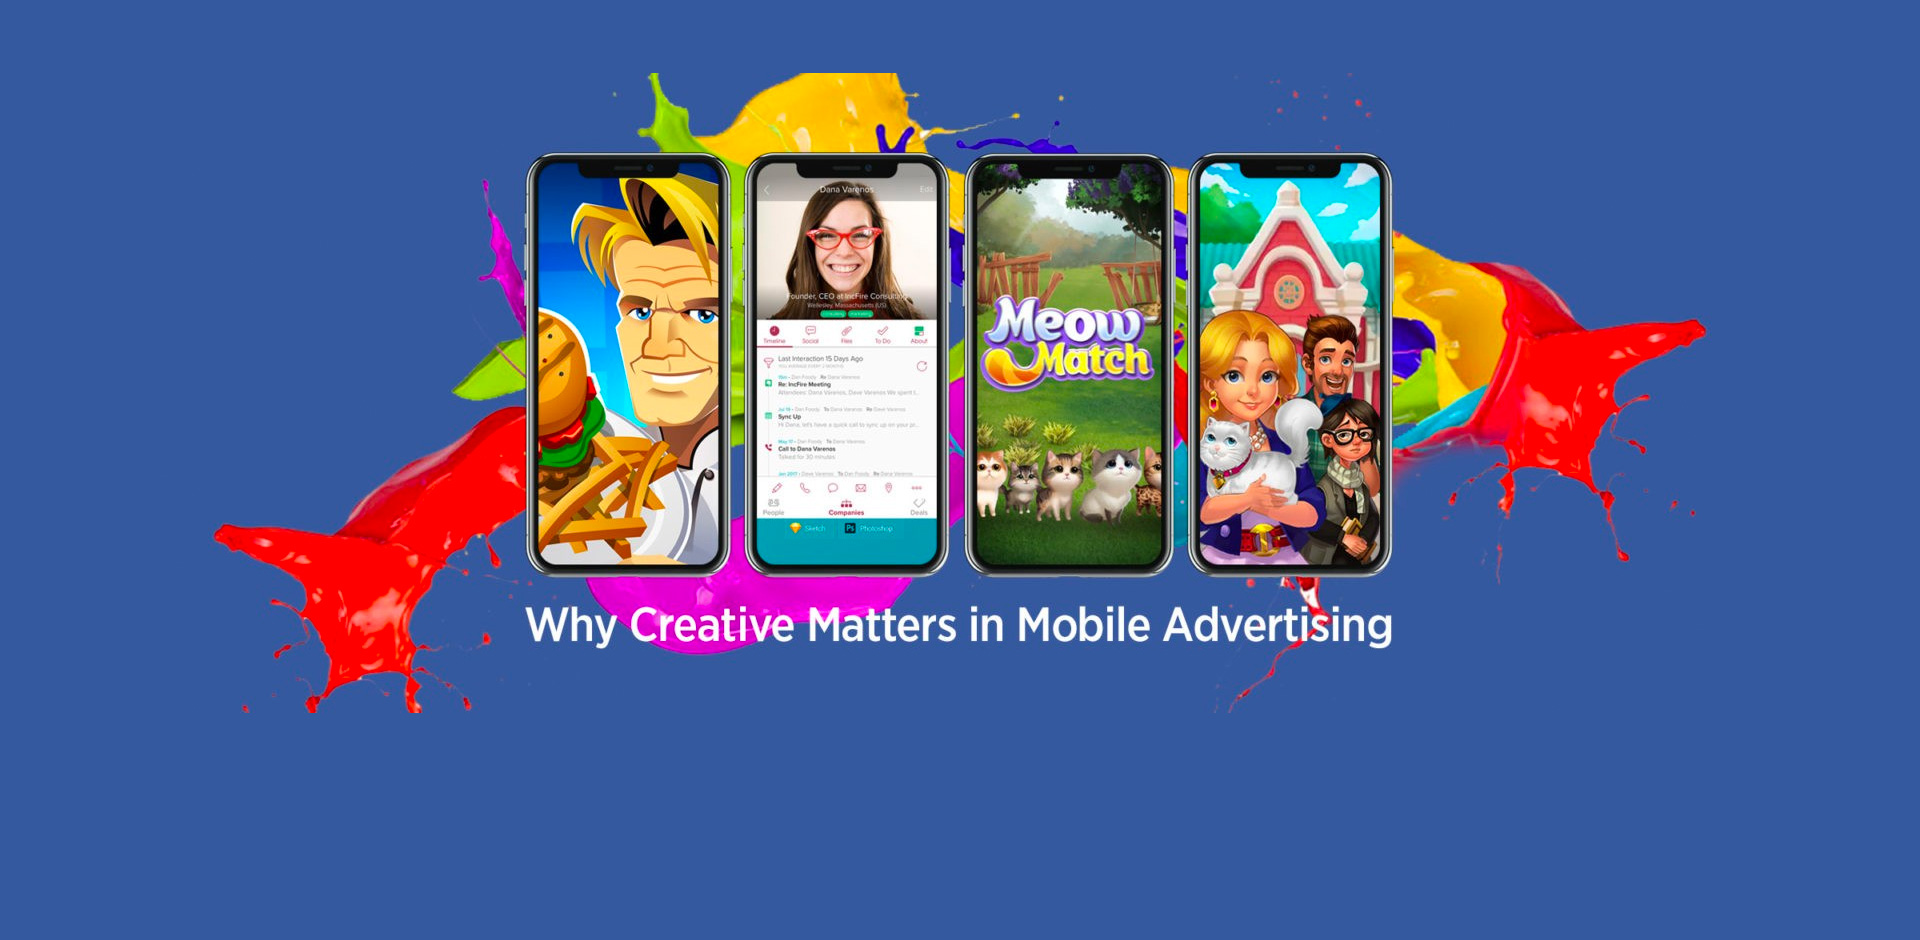 Why Creative Matters in Mobile Advertising